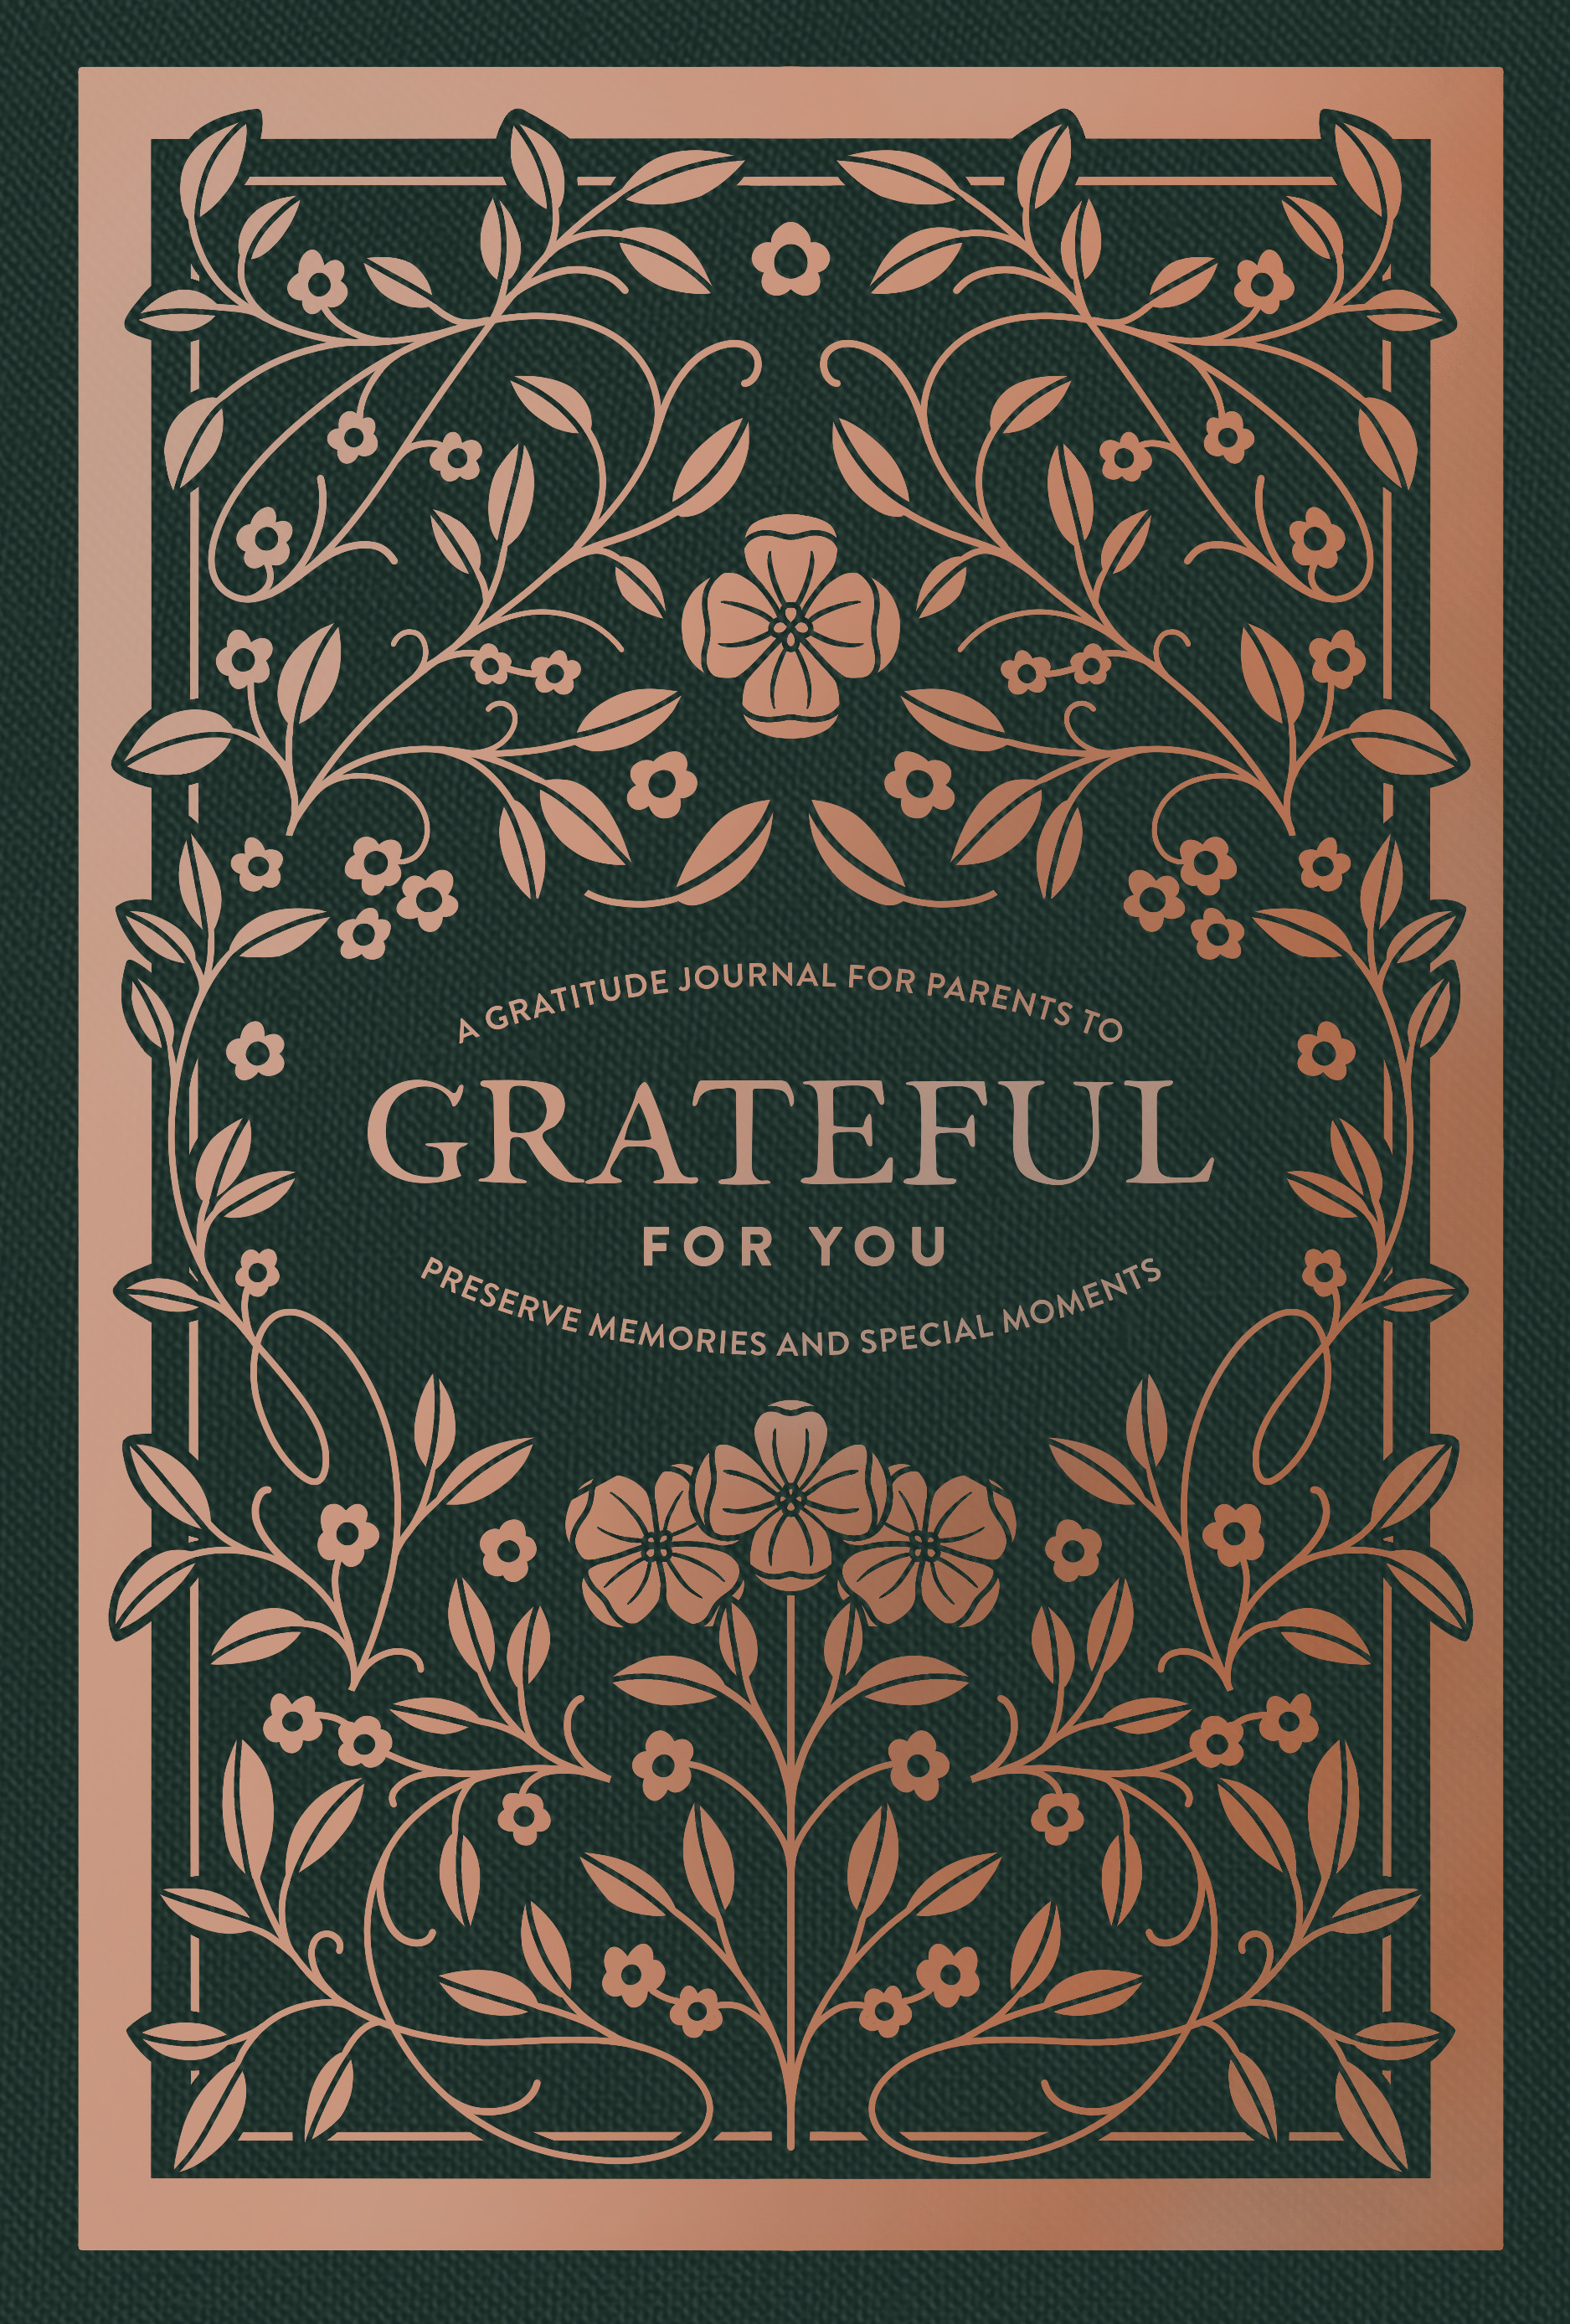 Grateful for You : A Gratitude Journal for Parents to Preserve Memories and Special Moments | Parenting